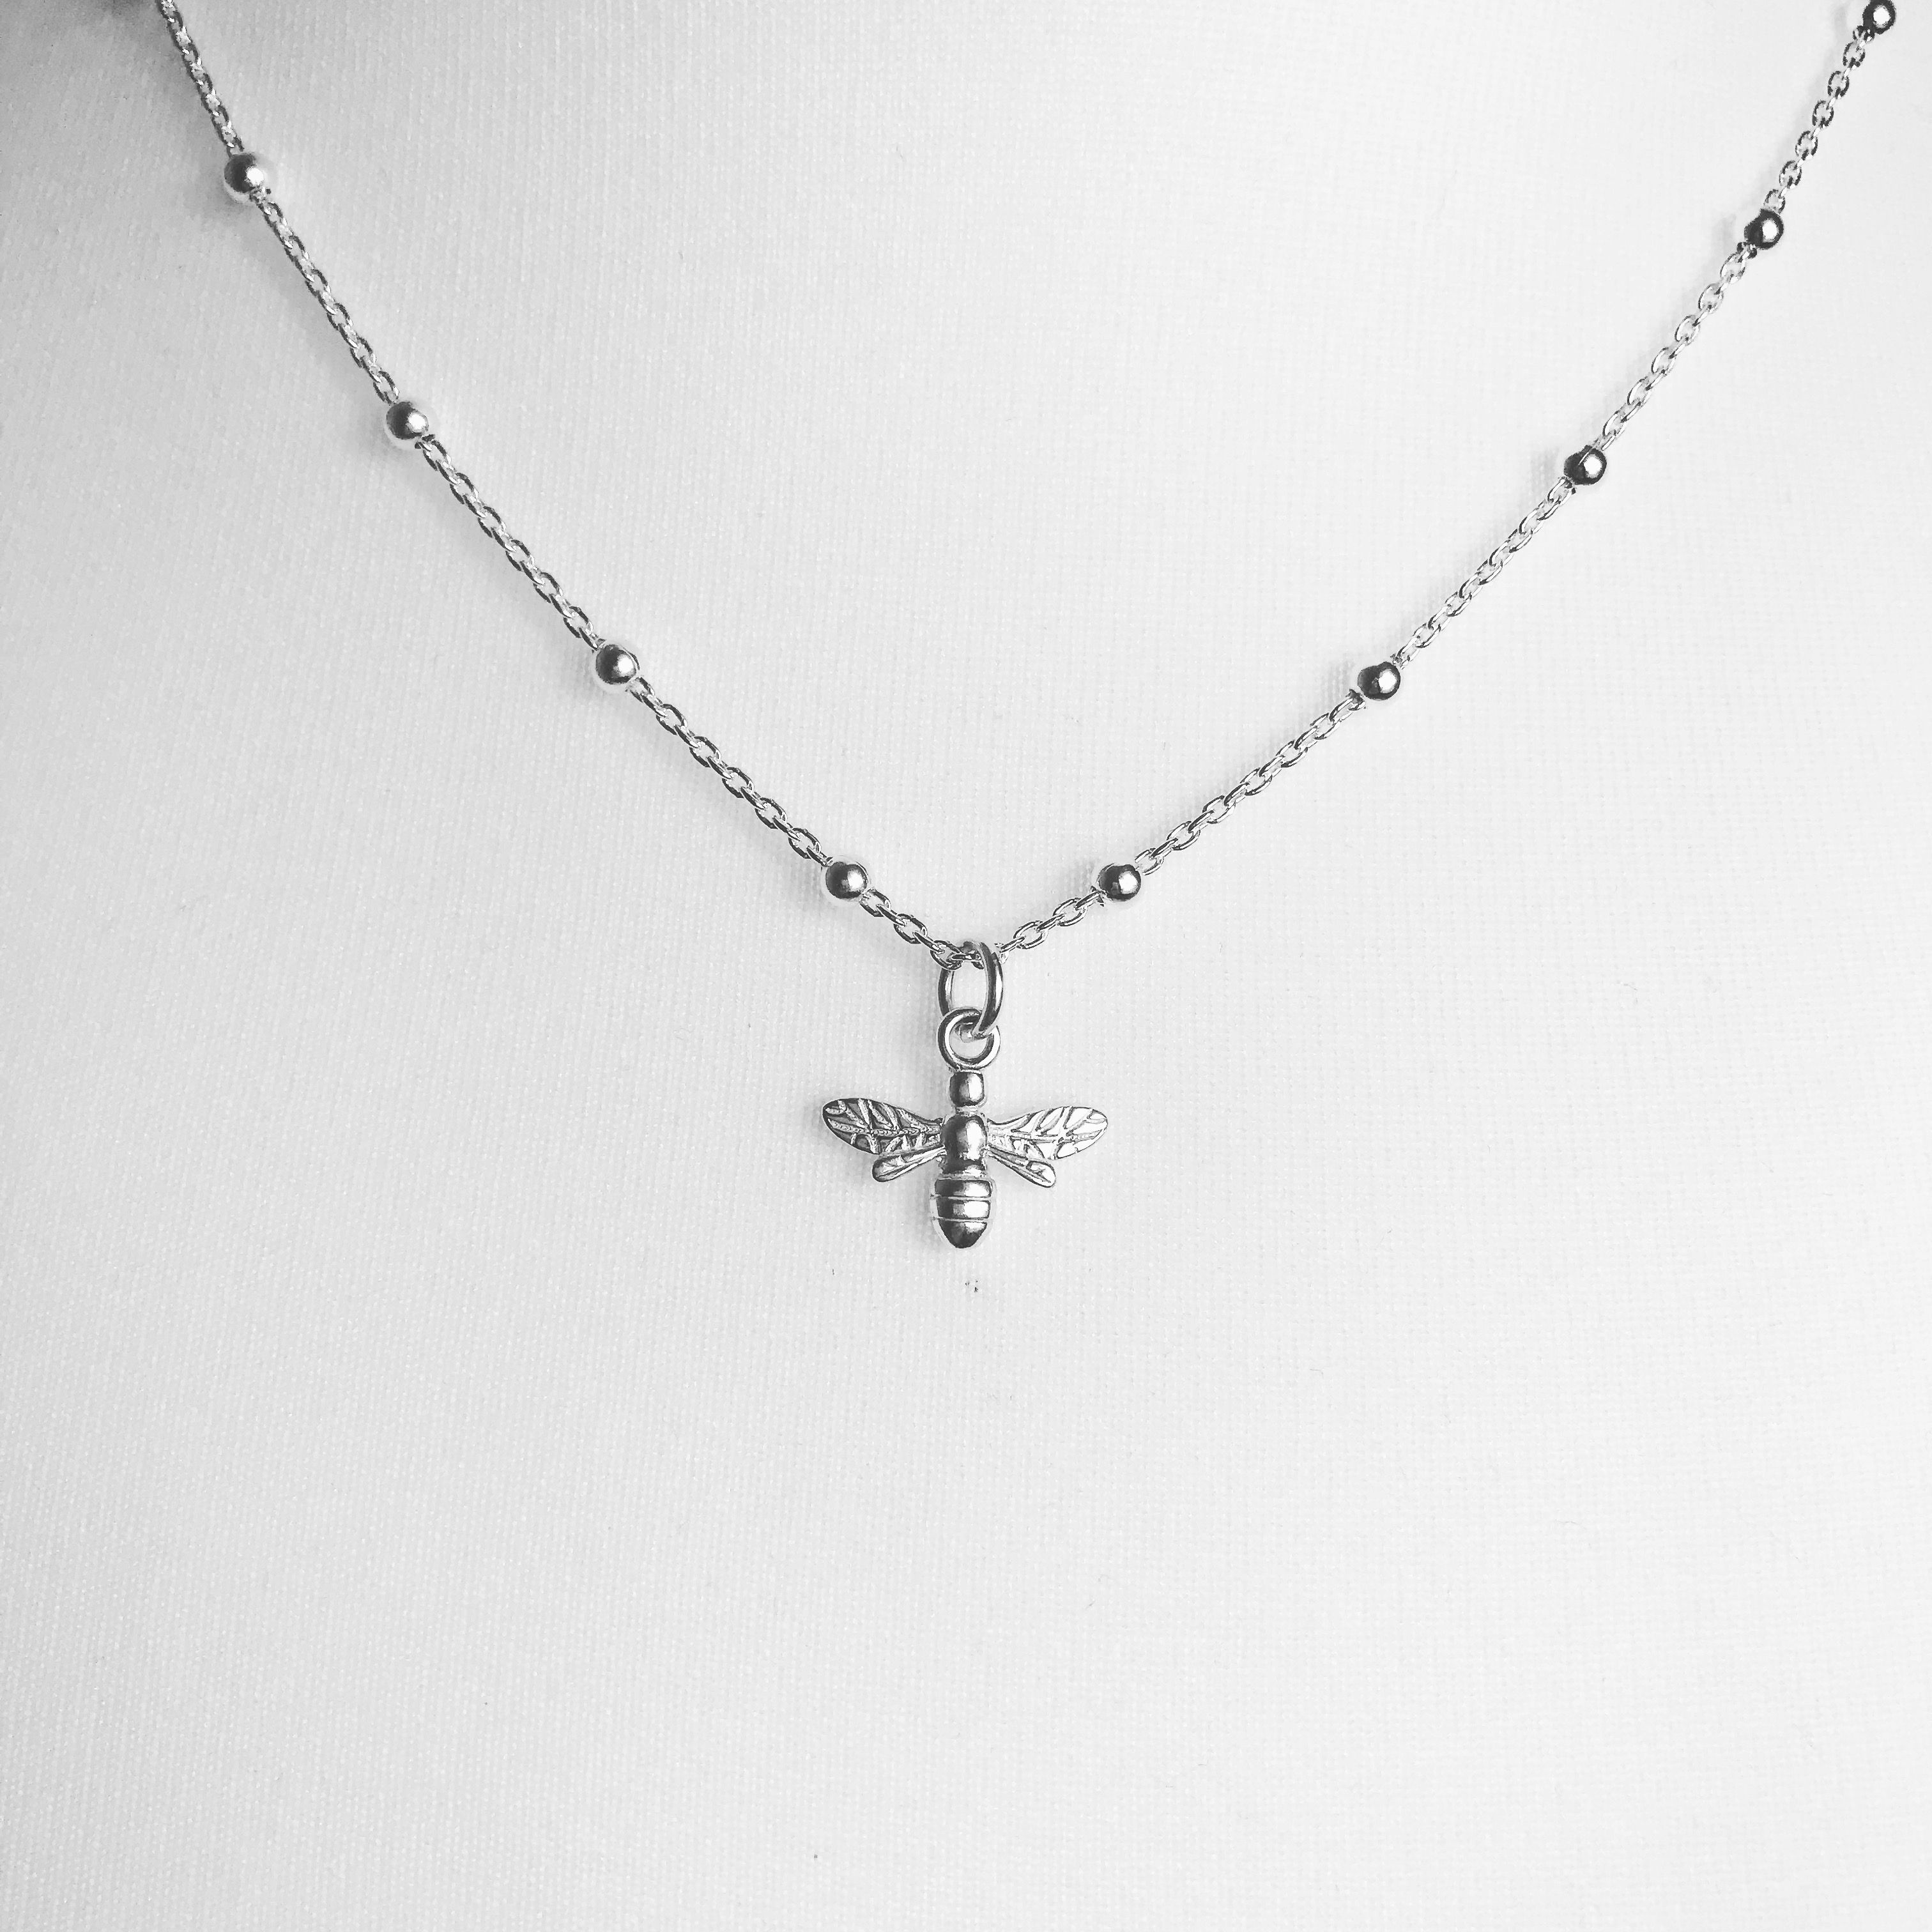 Sterling Silver Bee Necklace On Bobble Chain Regarding Most Recent Classic Cable Chain Necklaces (View 6 of 25)